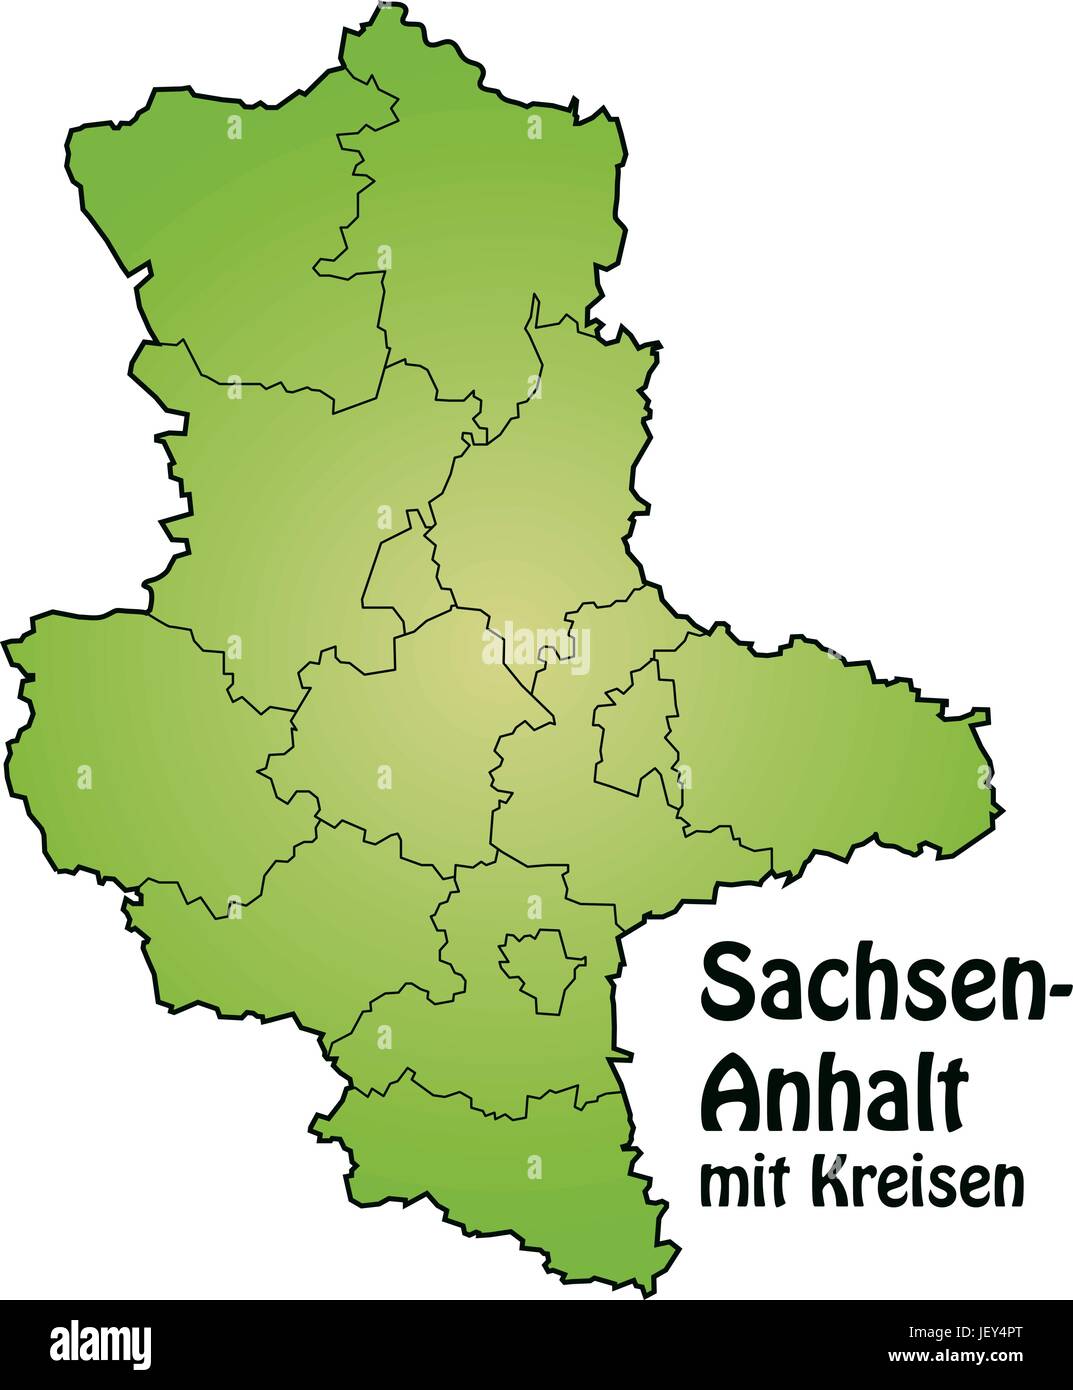 map of saxony-anhalt with borders in green Stock Vector